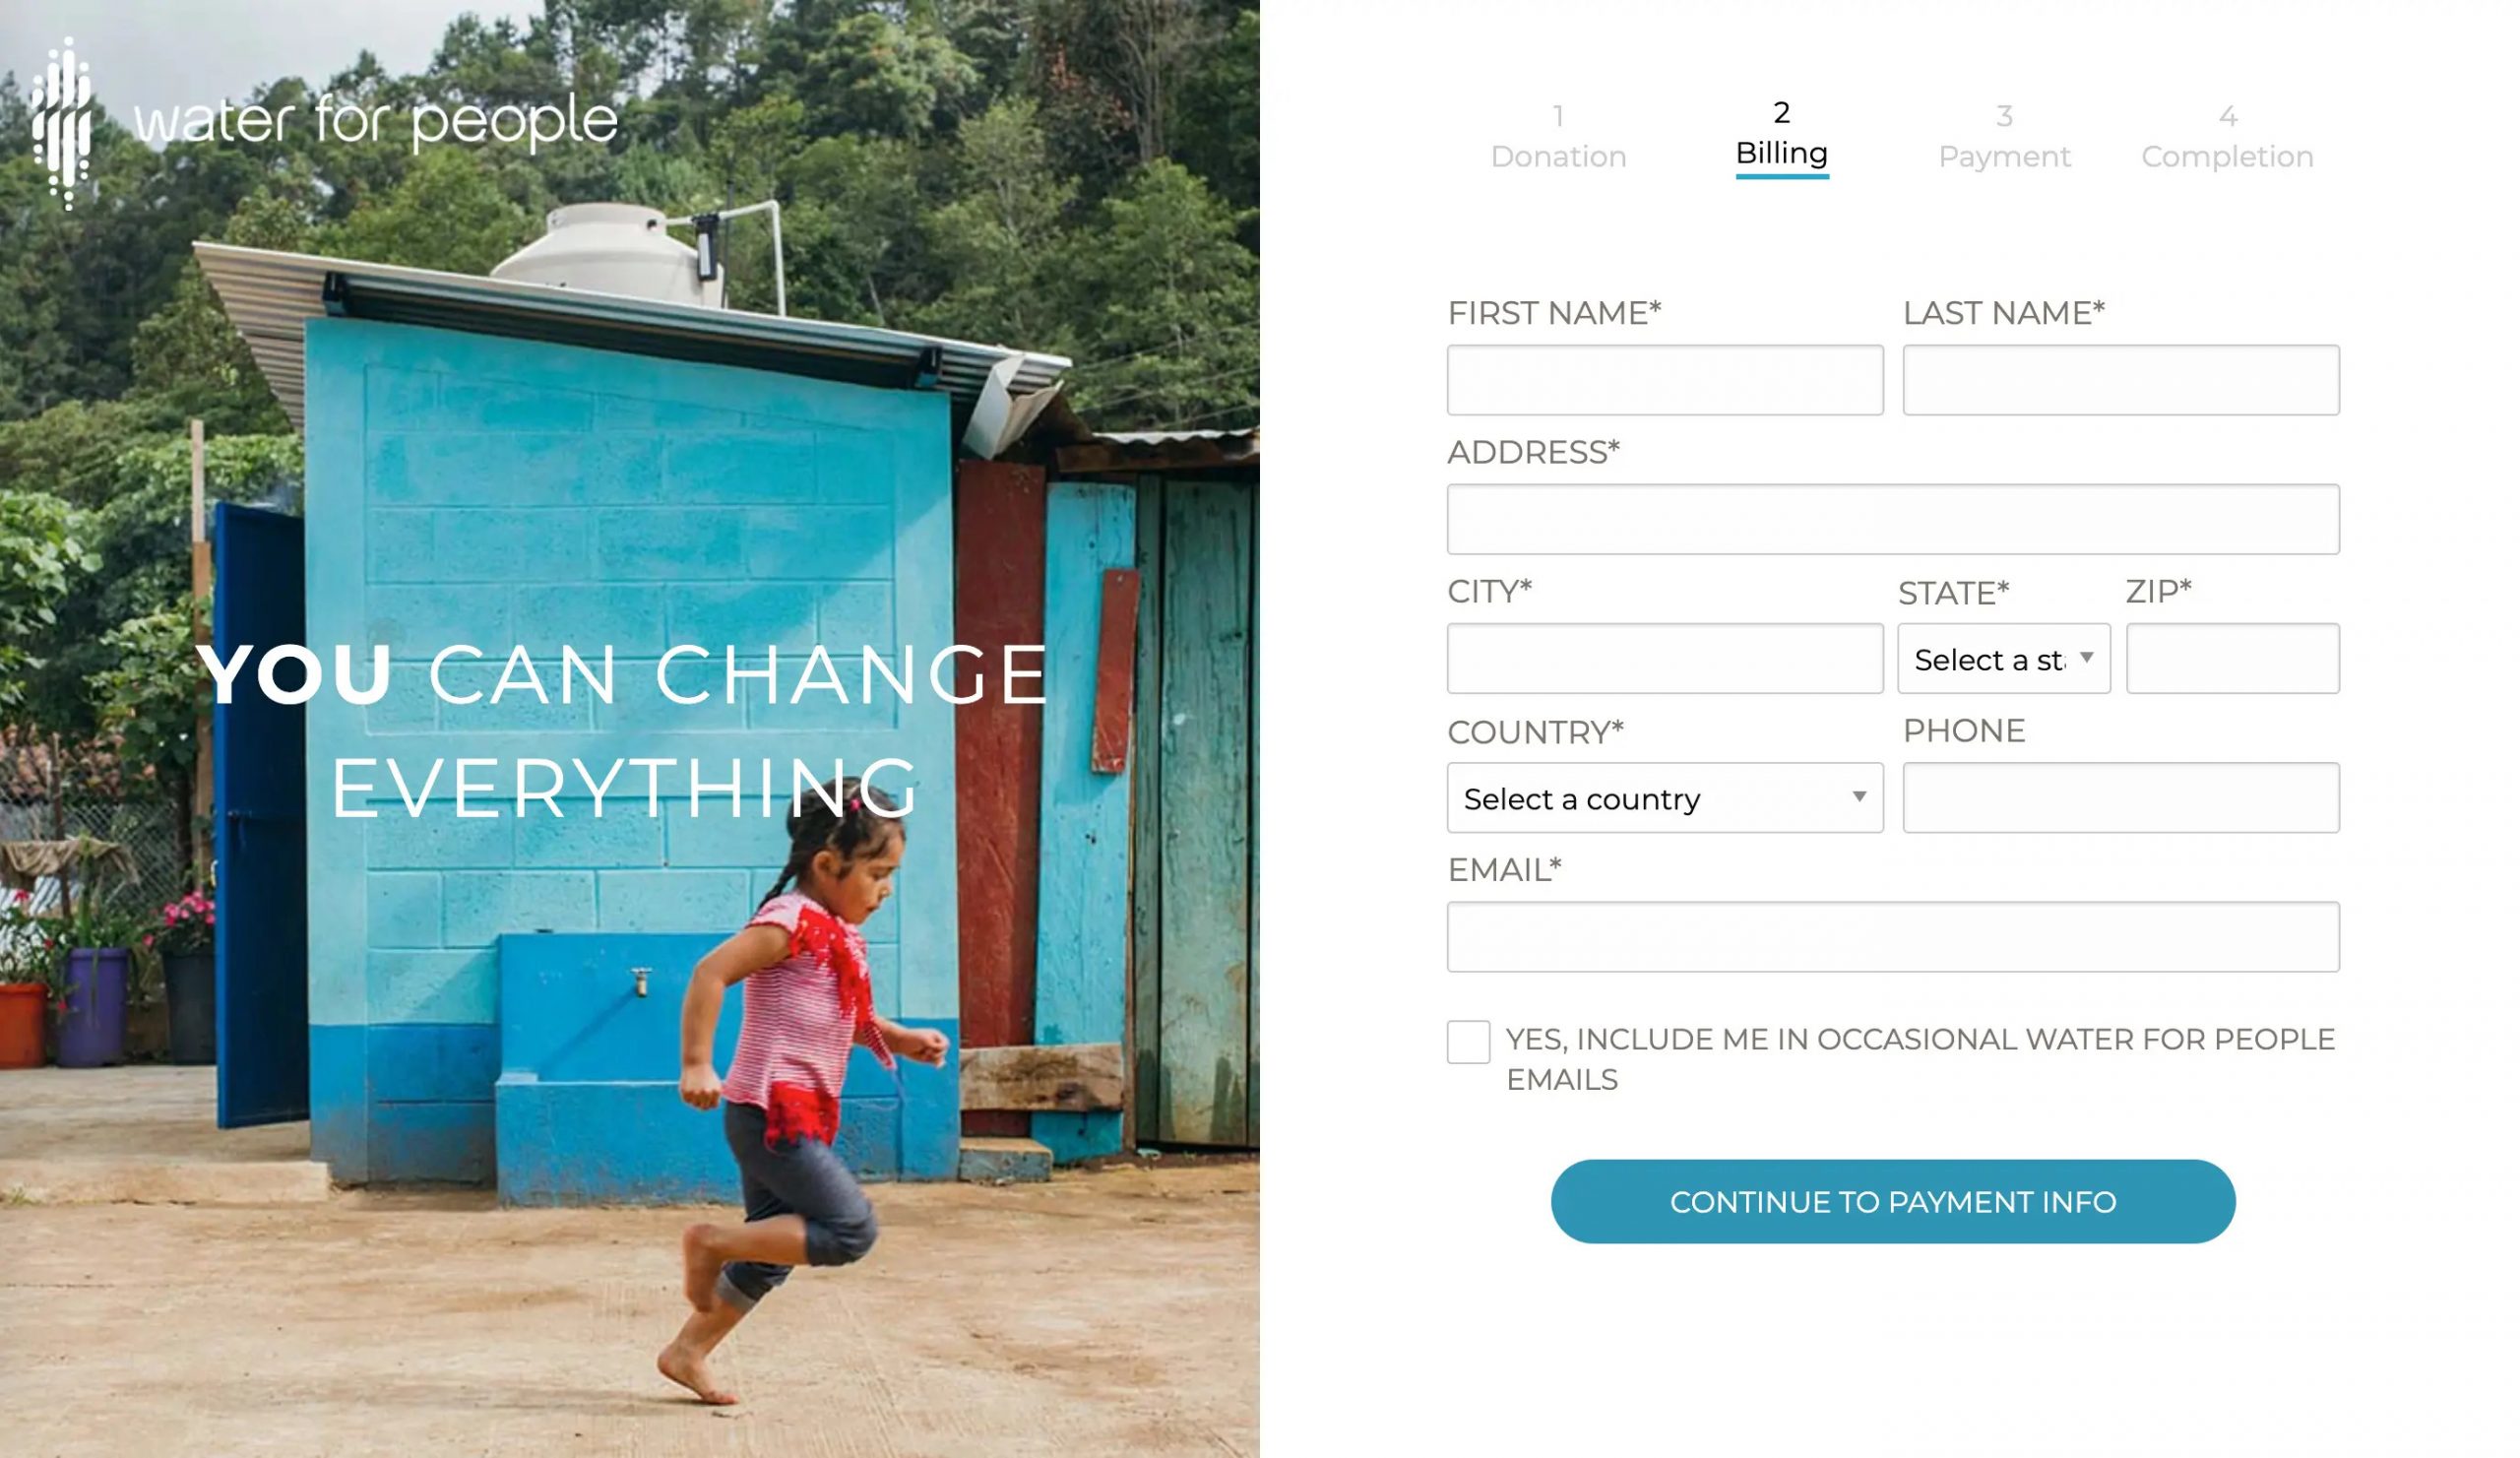 Capital Campaign Web Page: donation form example - Water for People